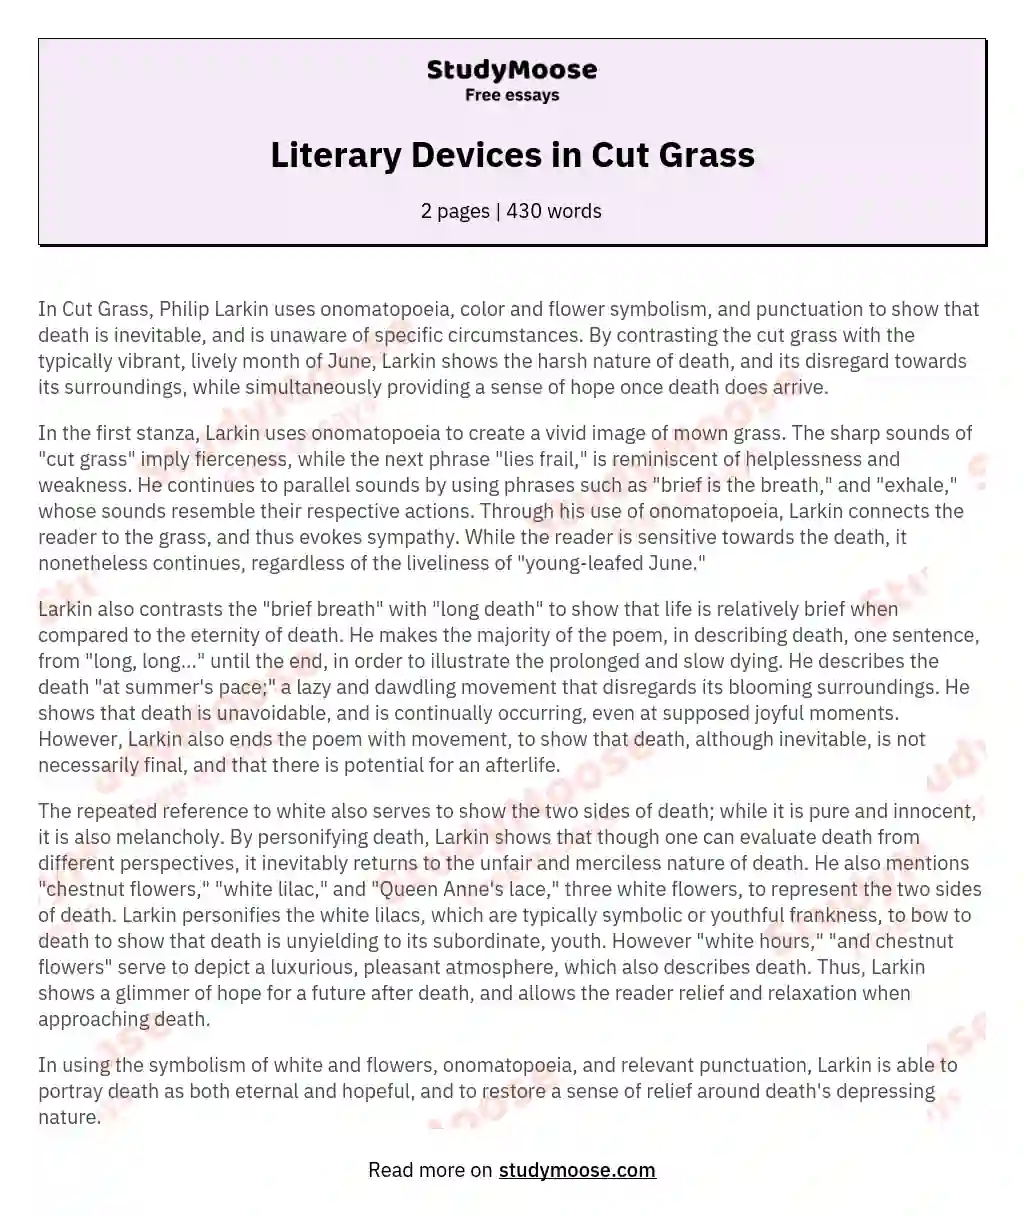 Literary Devices in Cut Grass essay